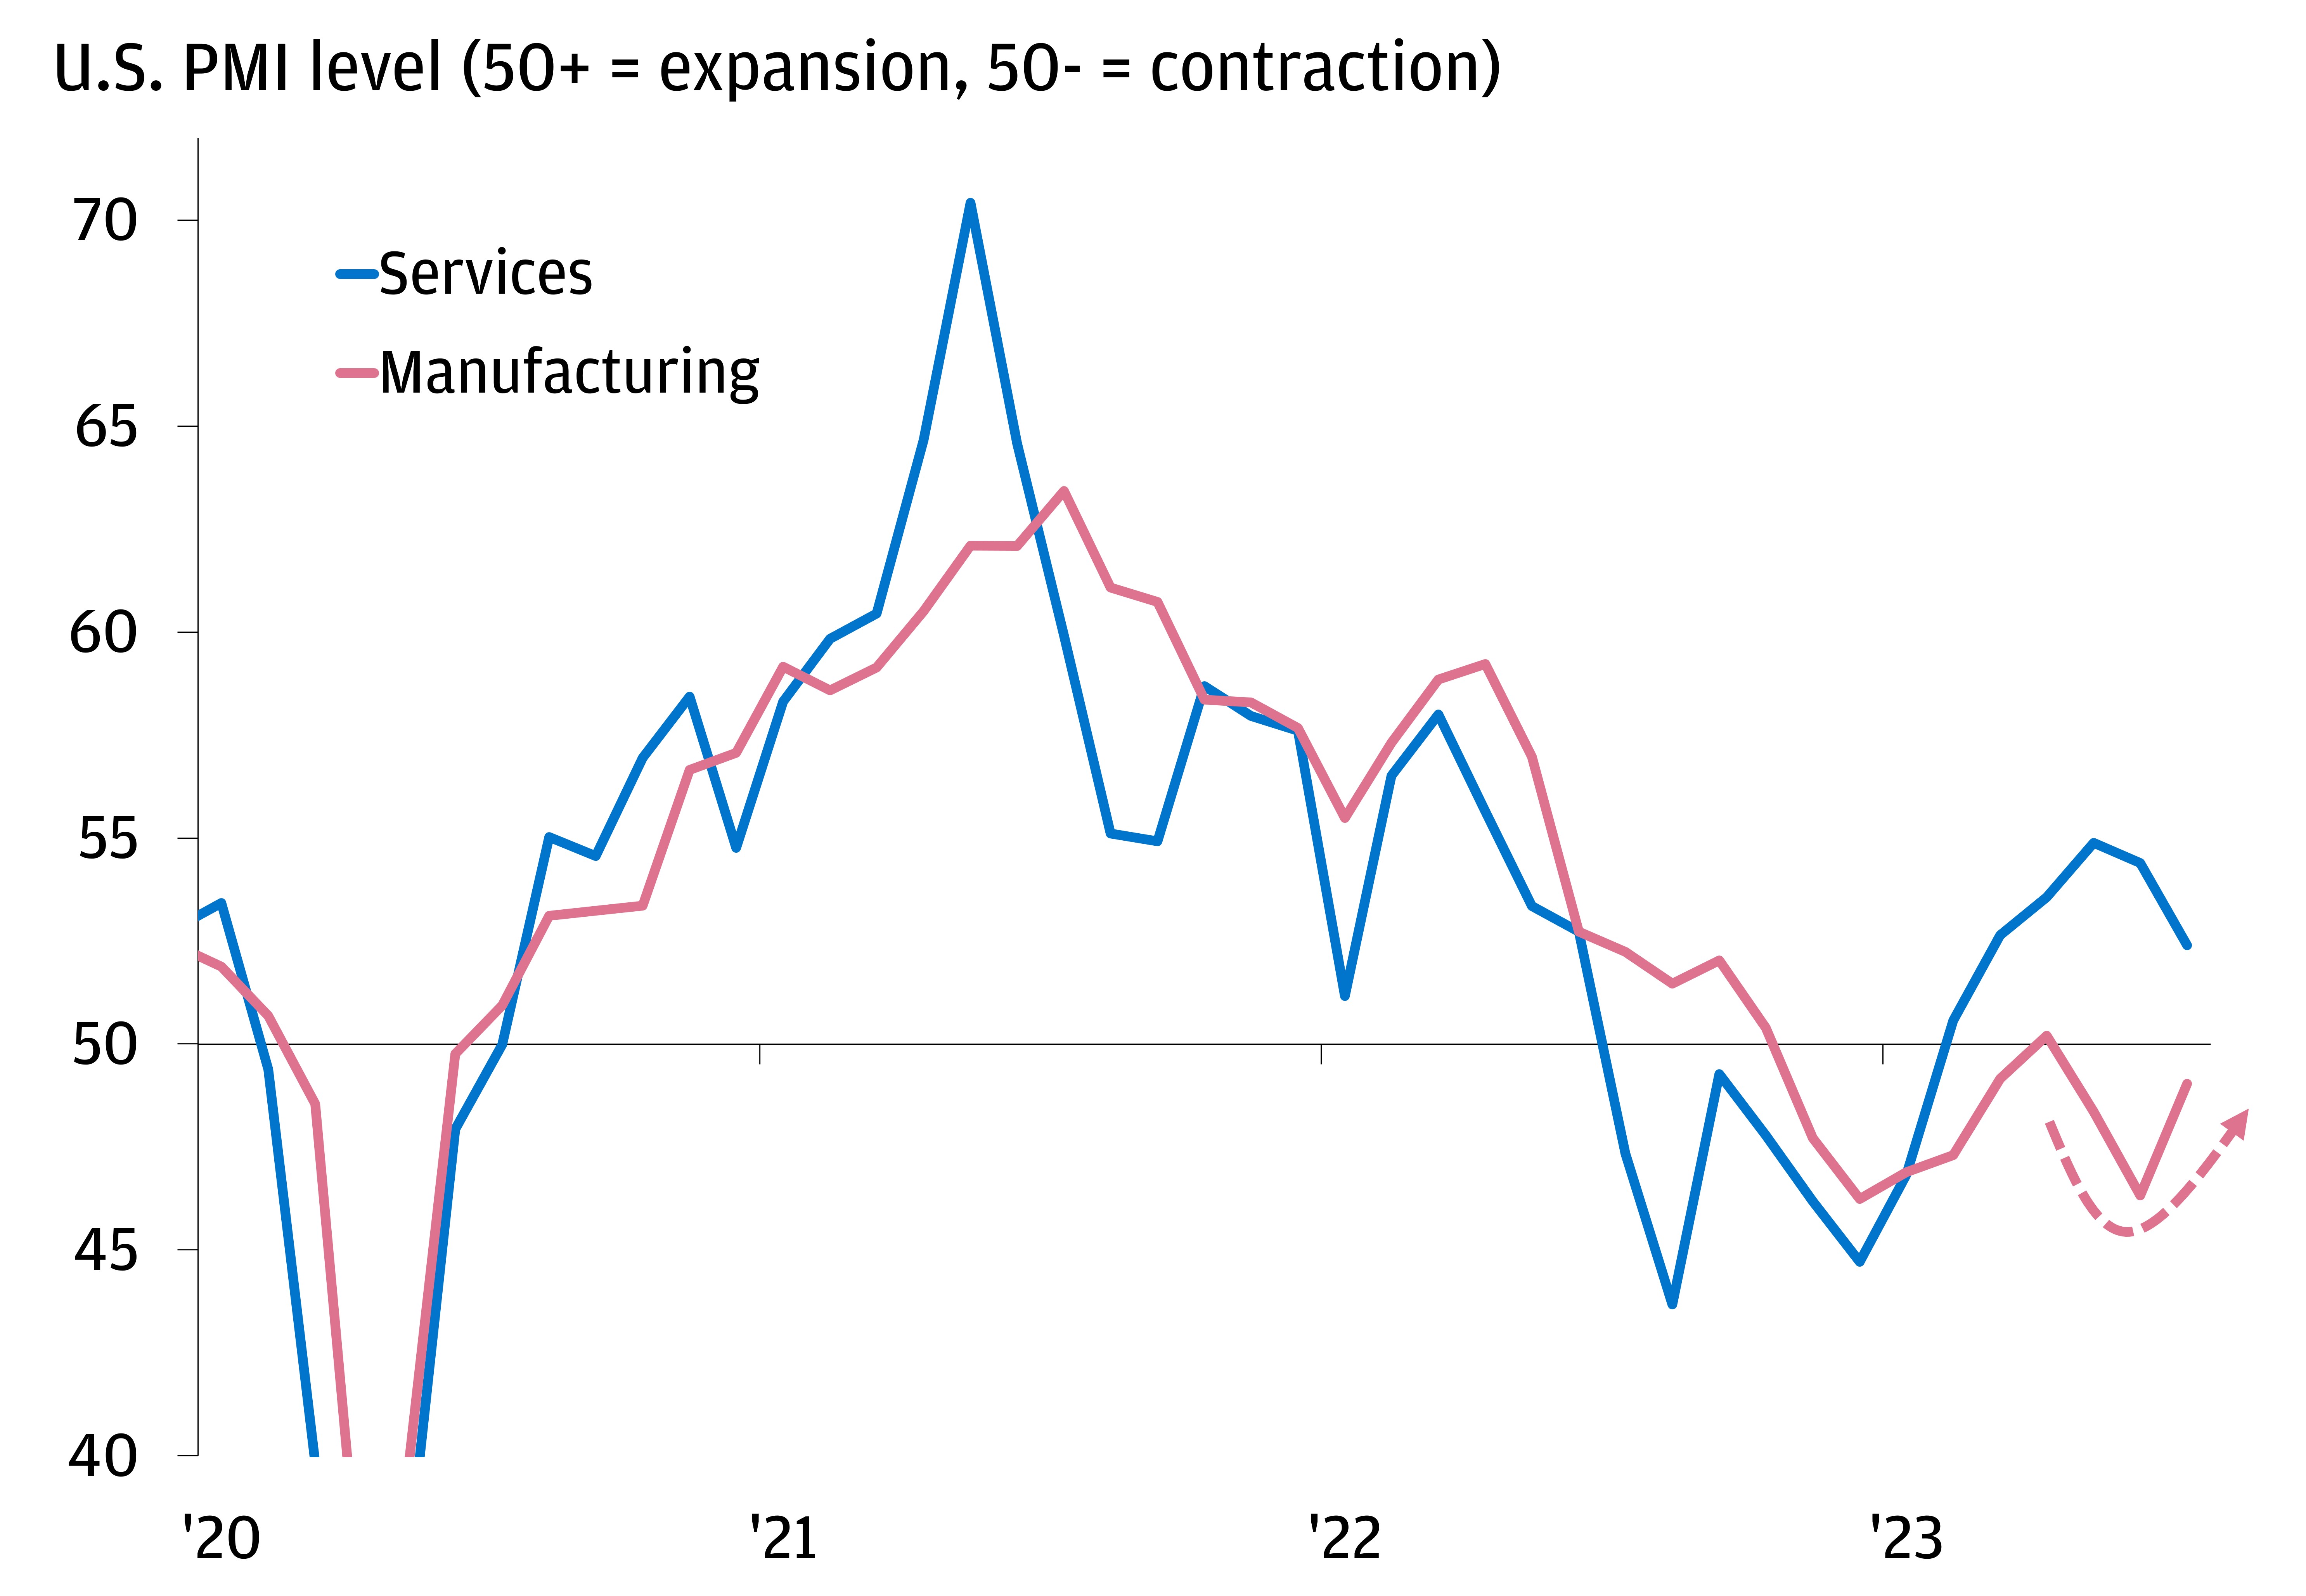 This chart shows the composite, services and manufacturing PMI level in three separate lines.